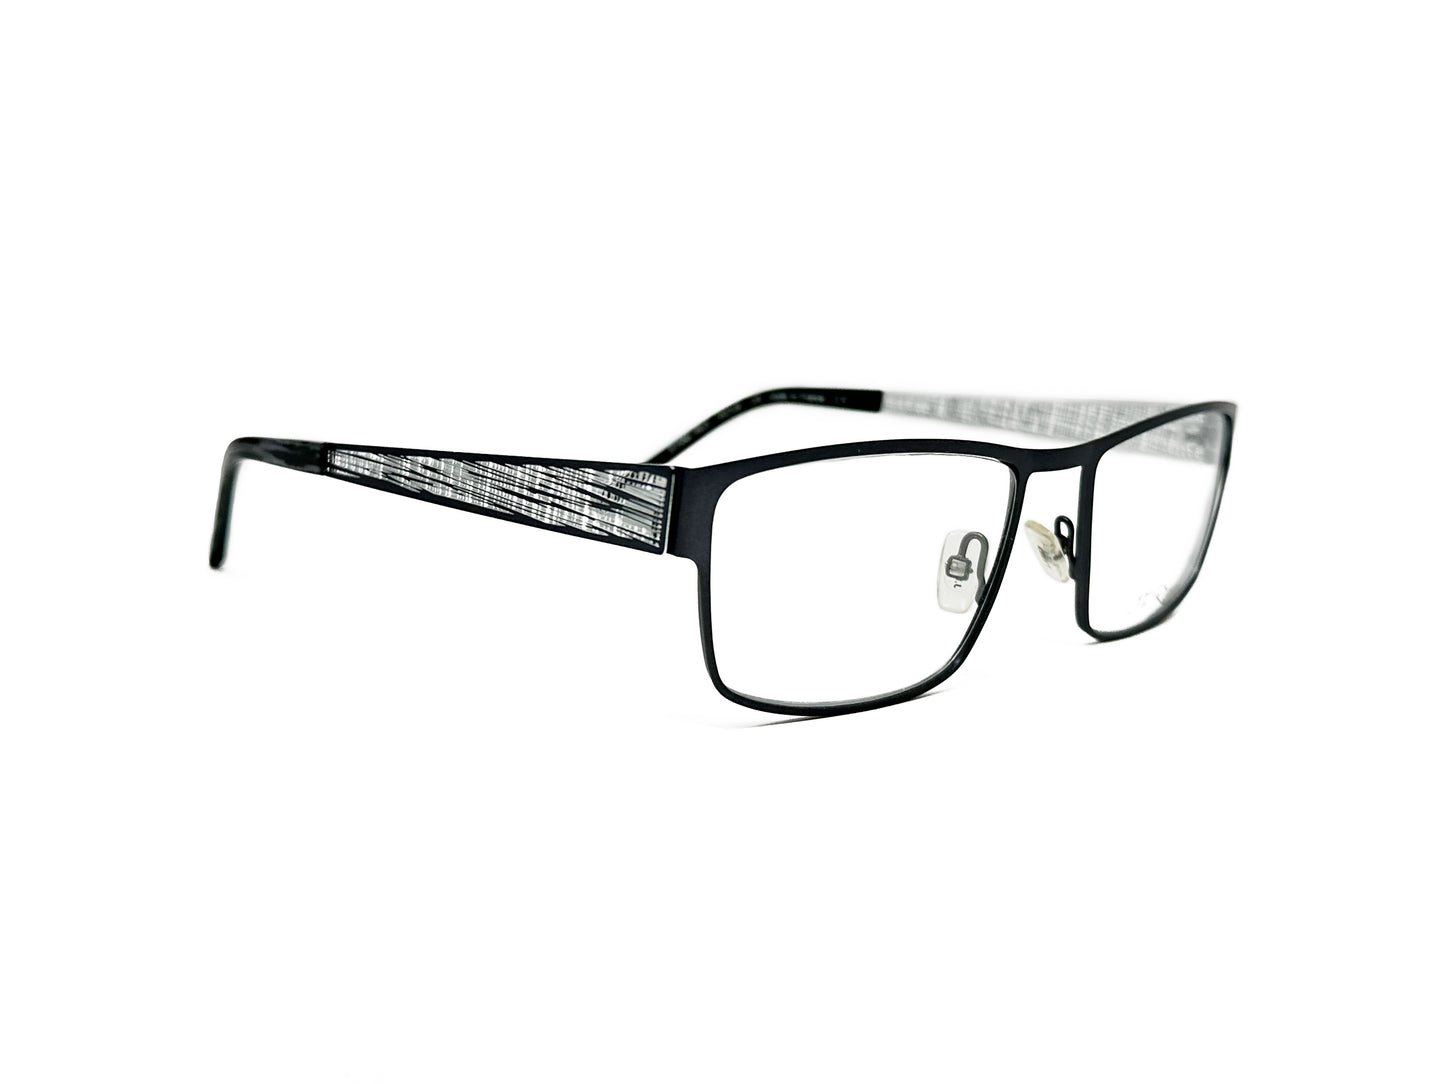 JF Rey rectangular, metal, optical frame with linen pattern cutout on temples. Model: JF2586. Color: 0513 - Black. Side view.